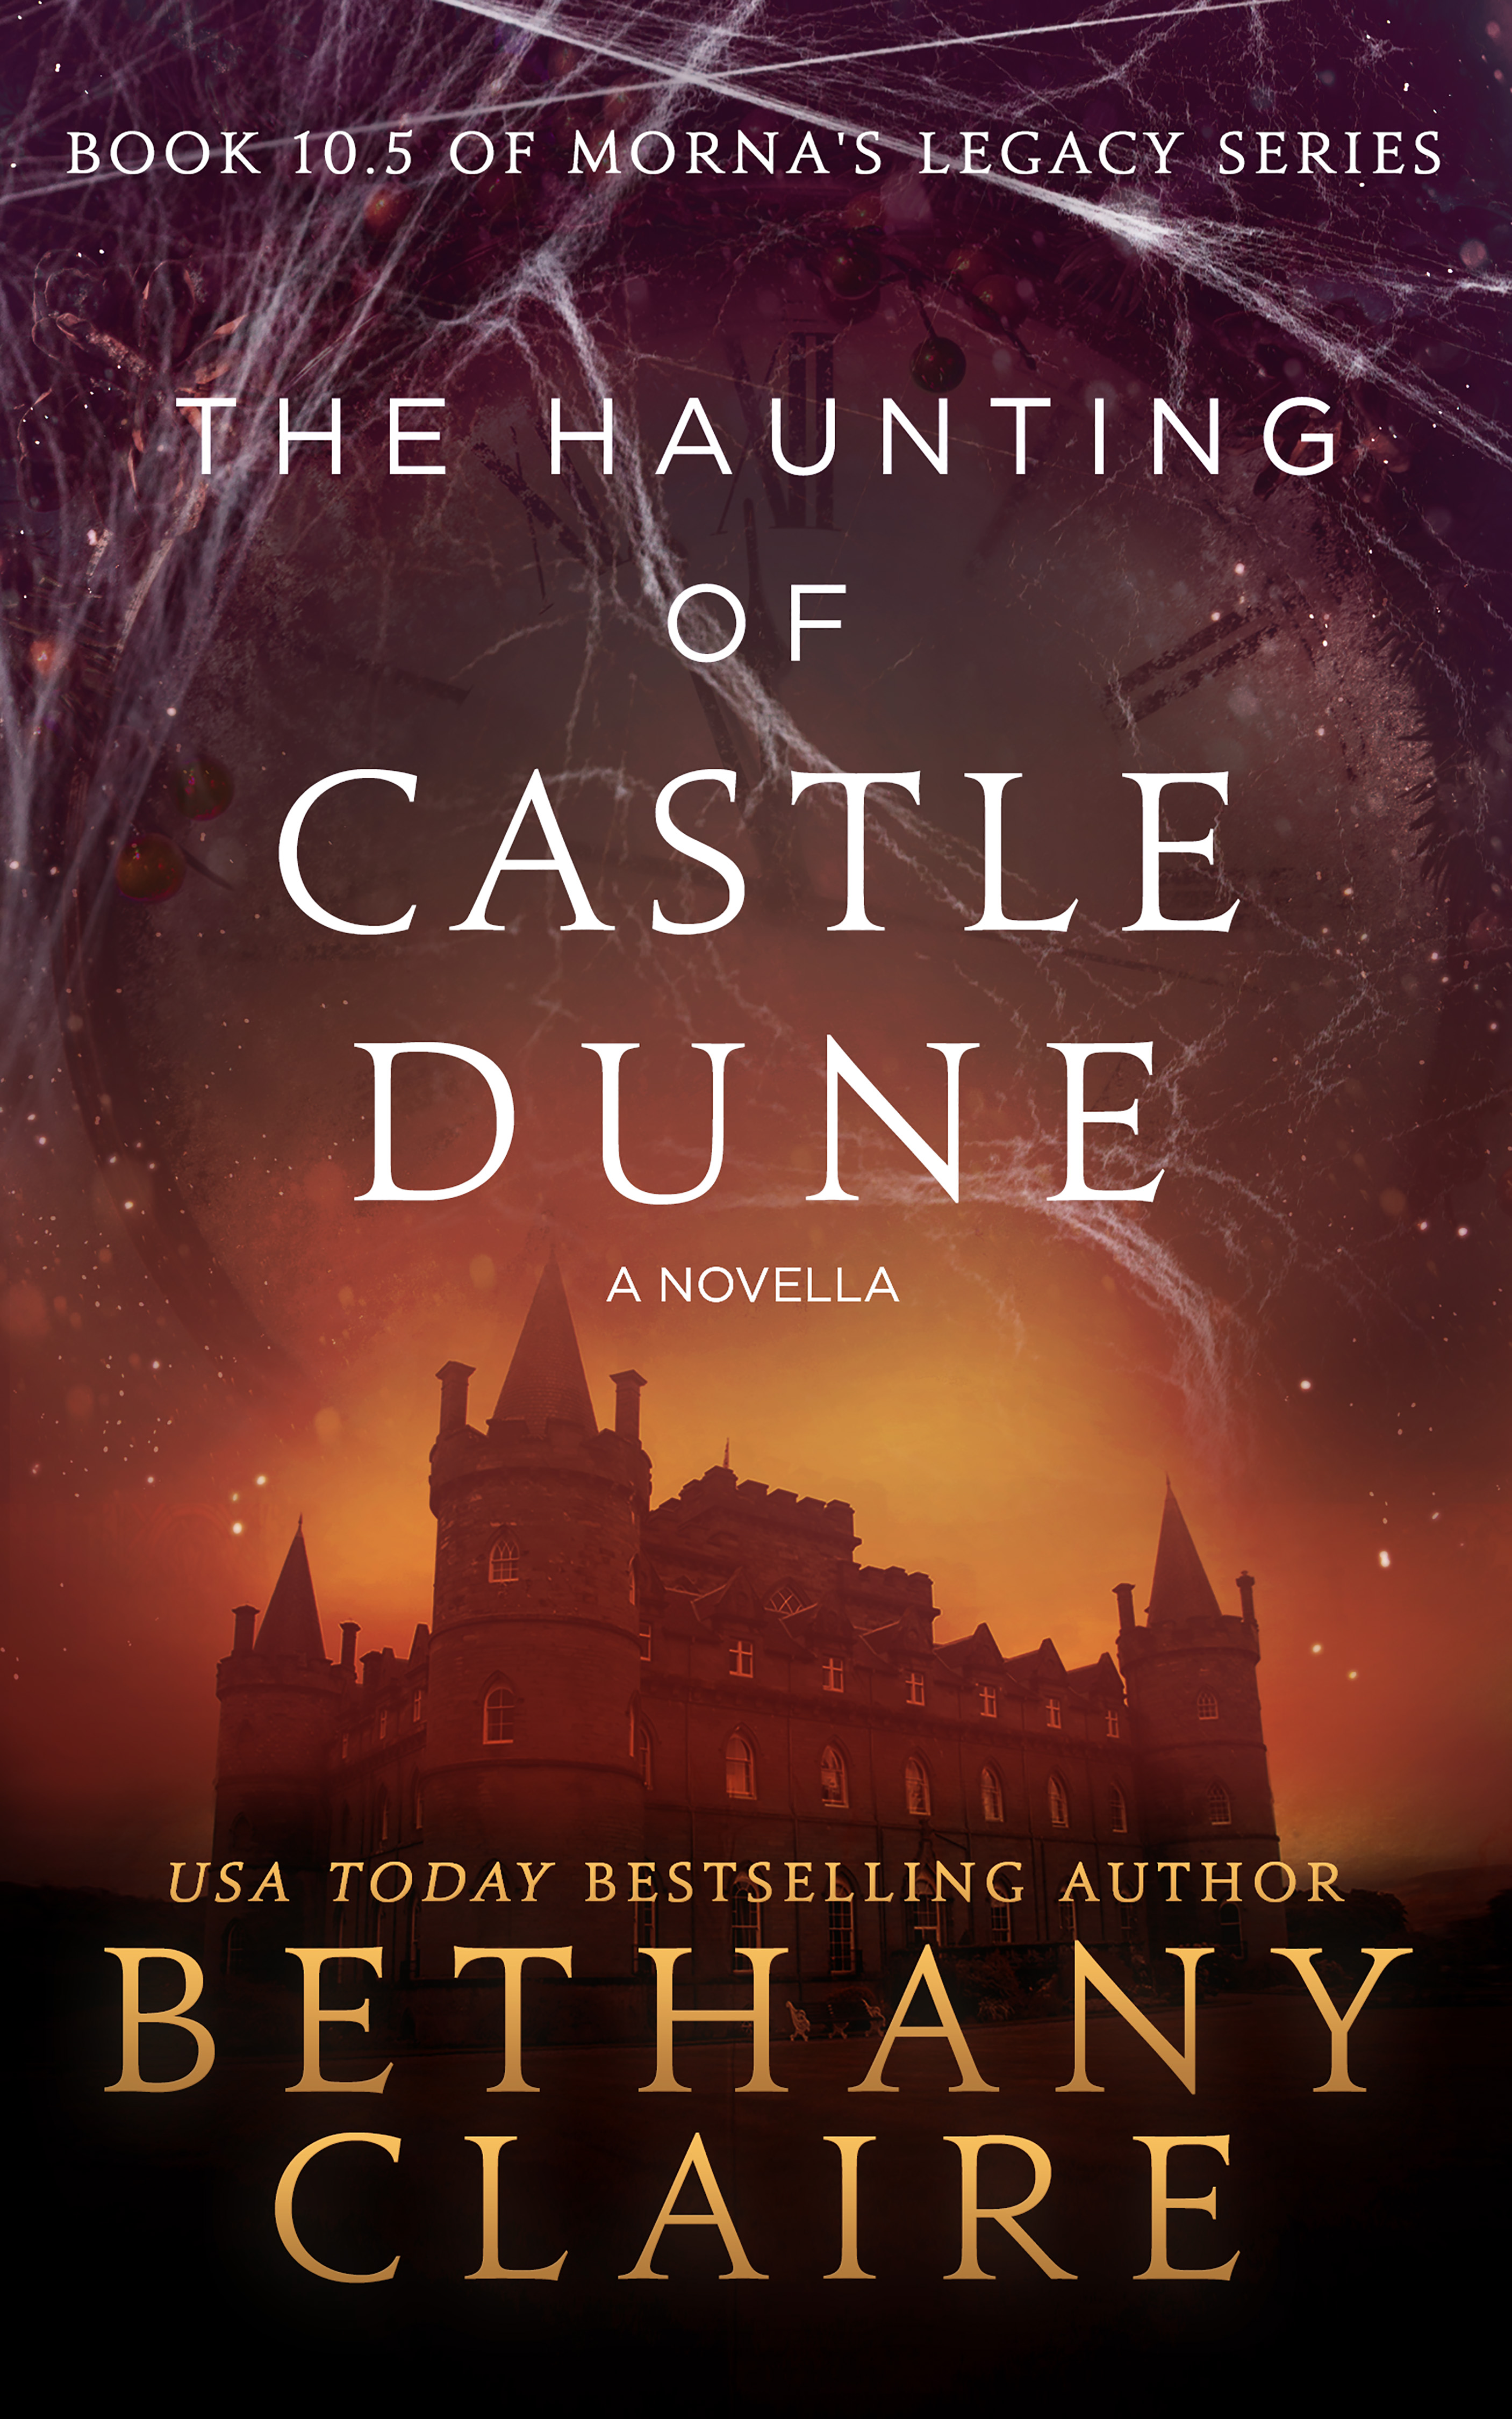 The Haunting of Castle Dune